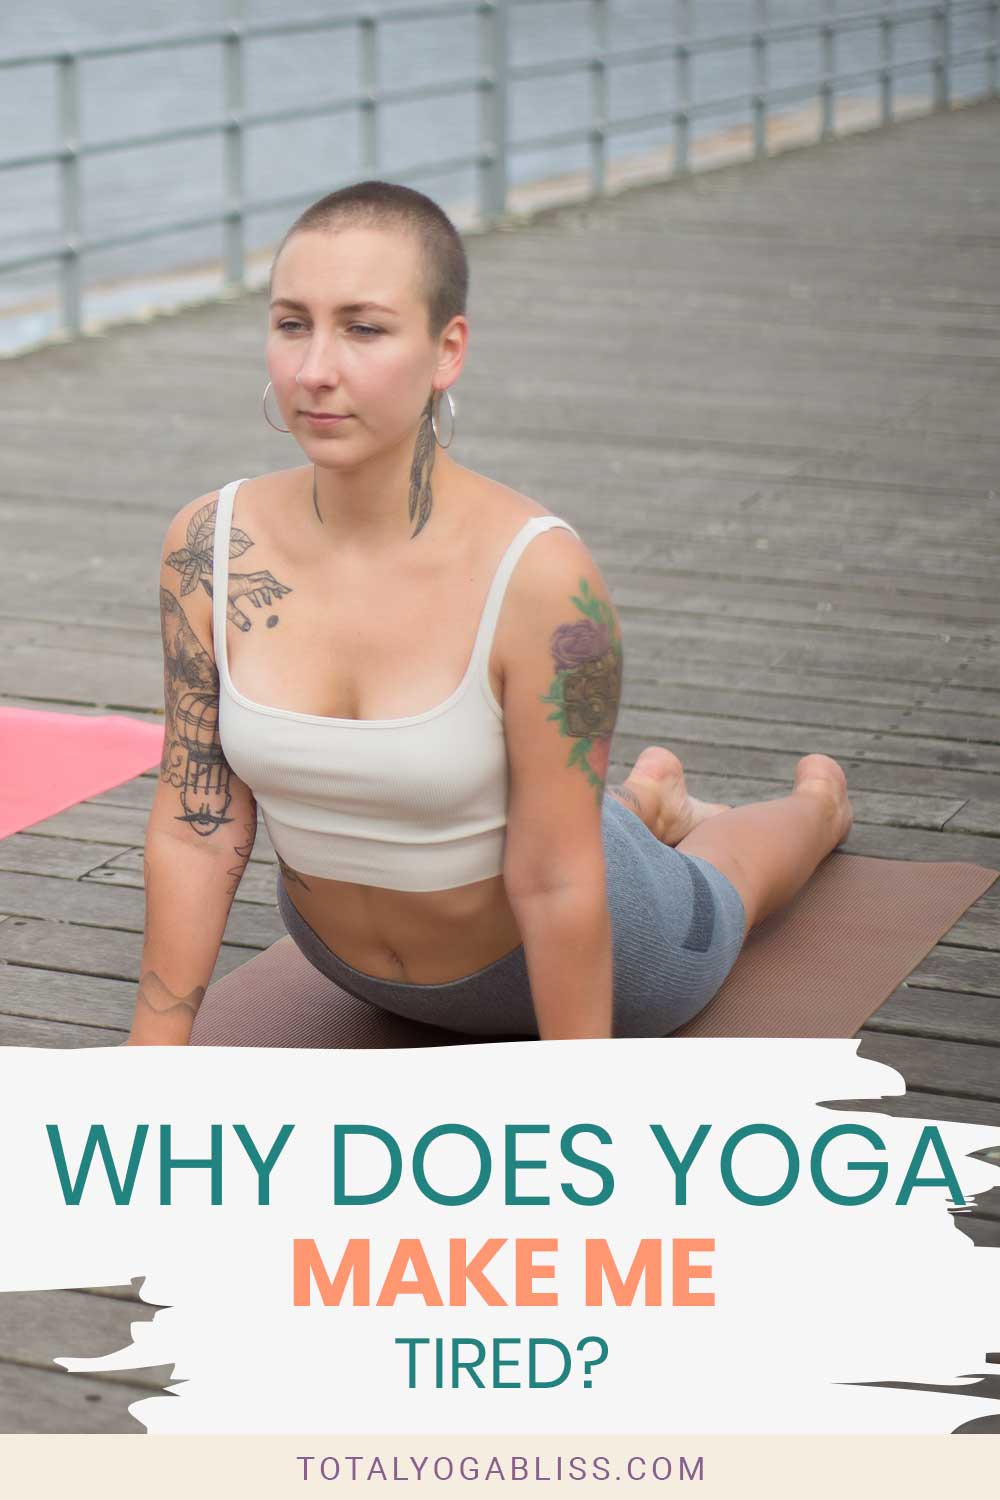 Why Does Yoga Make Me Tired?